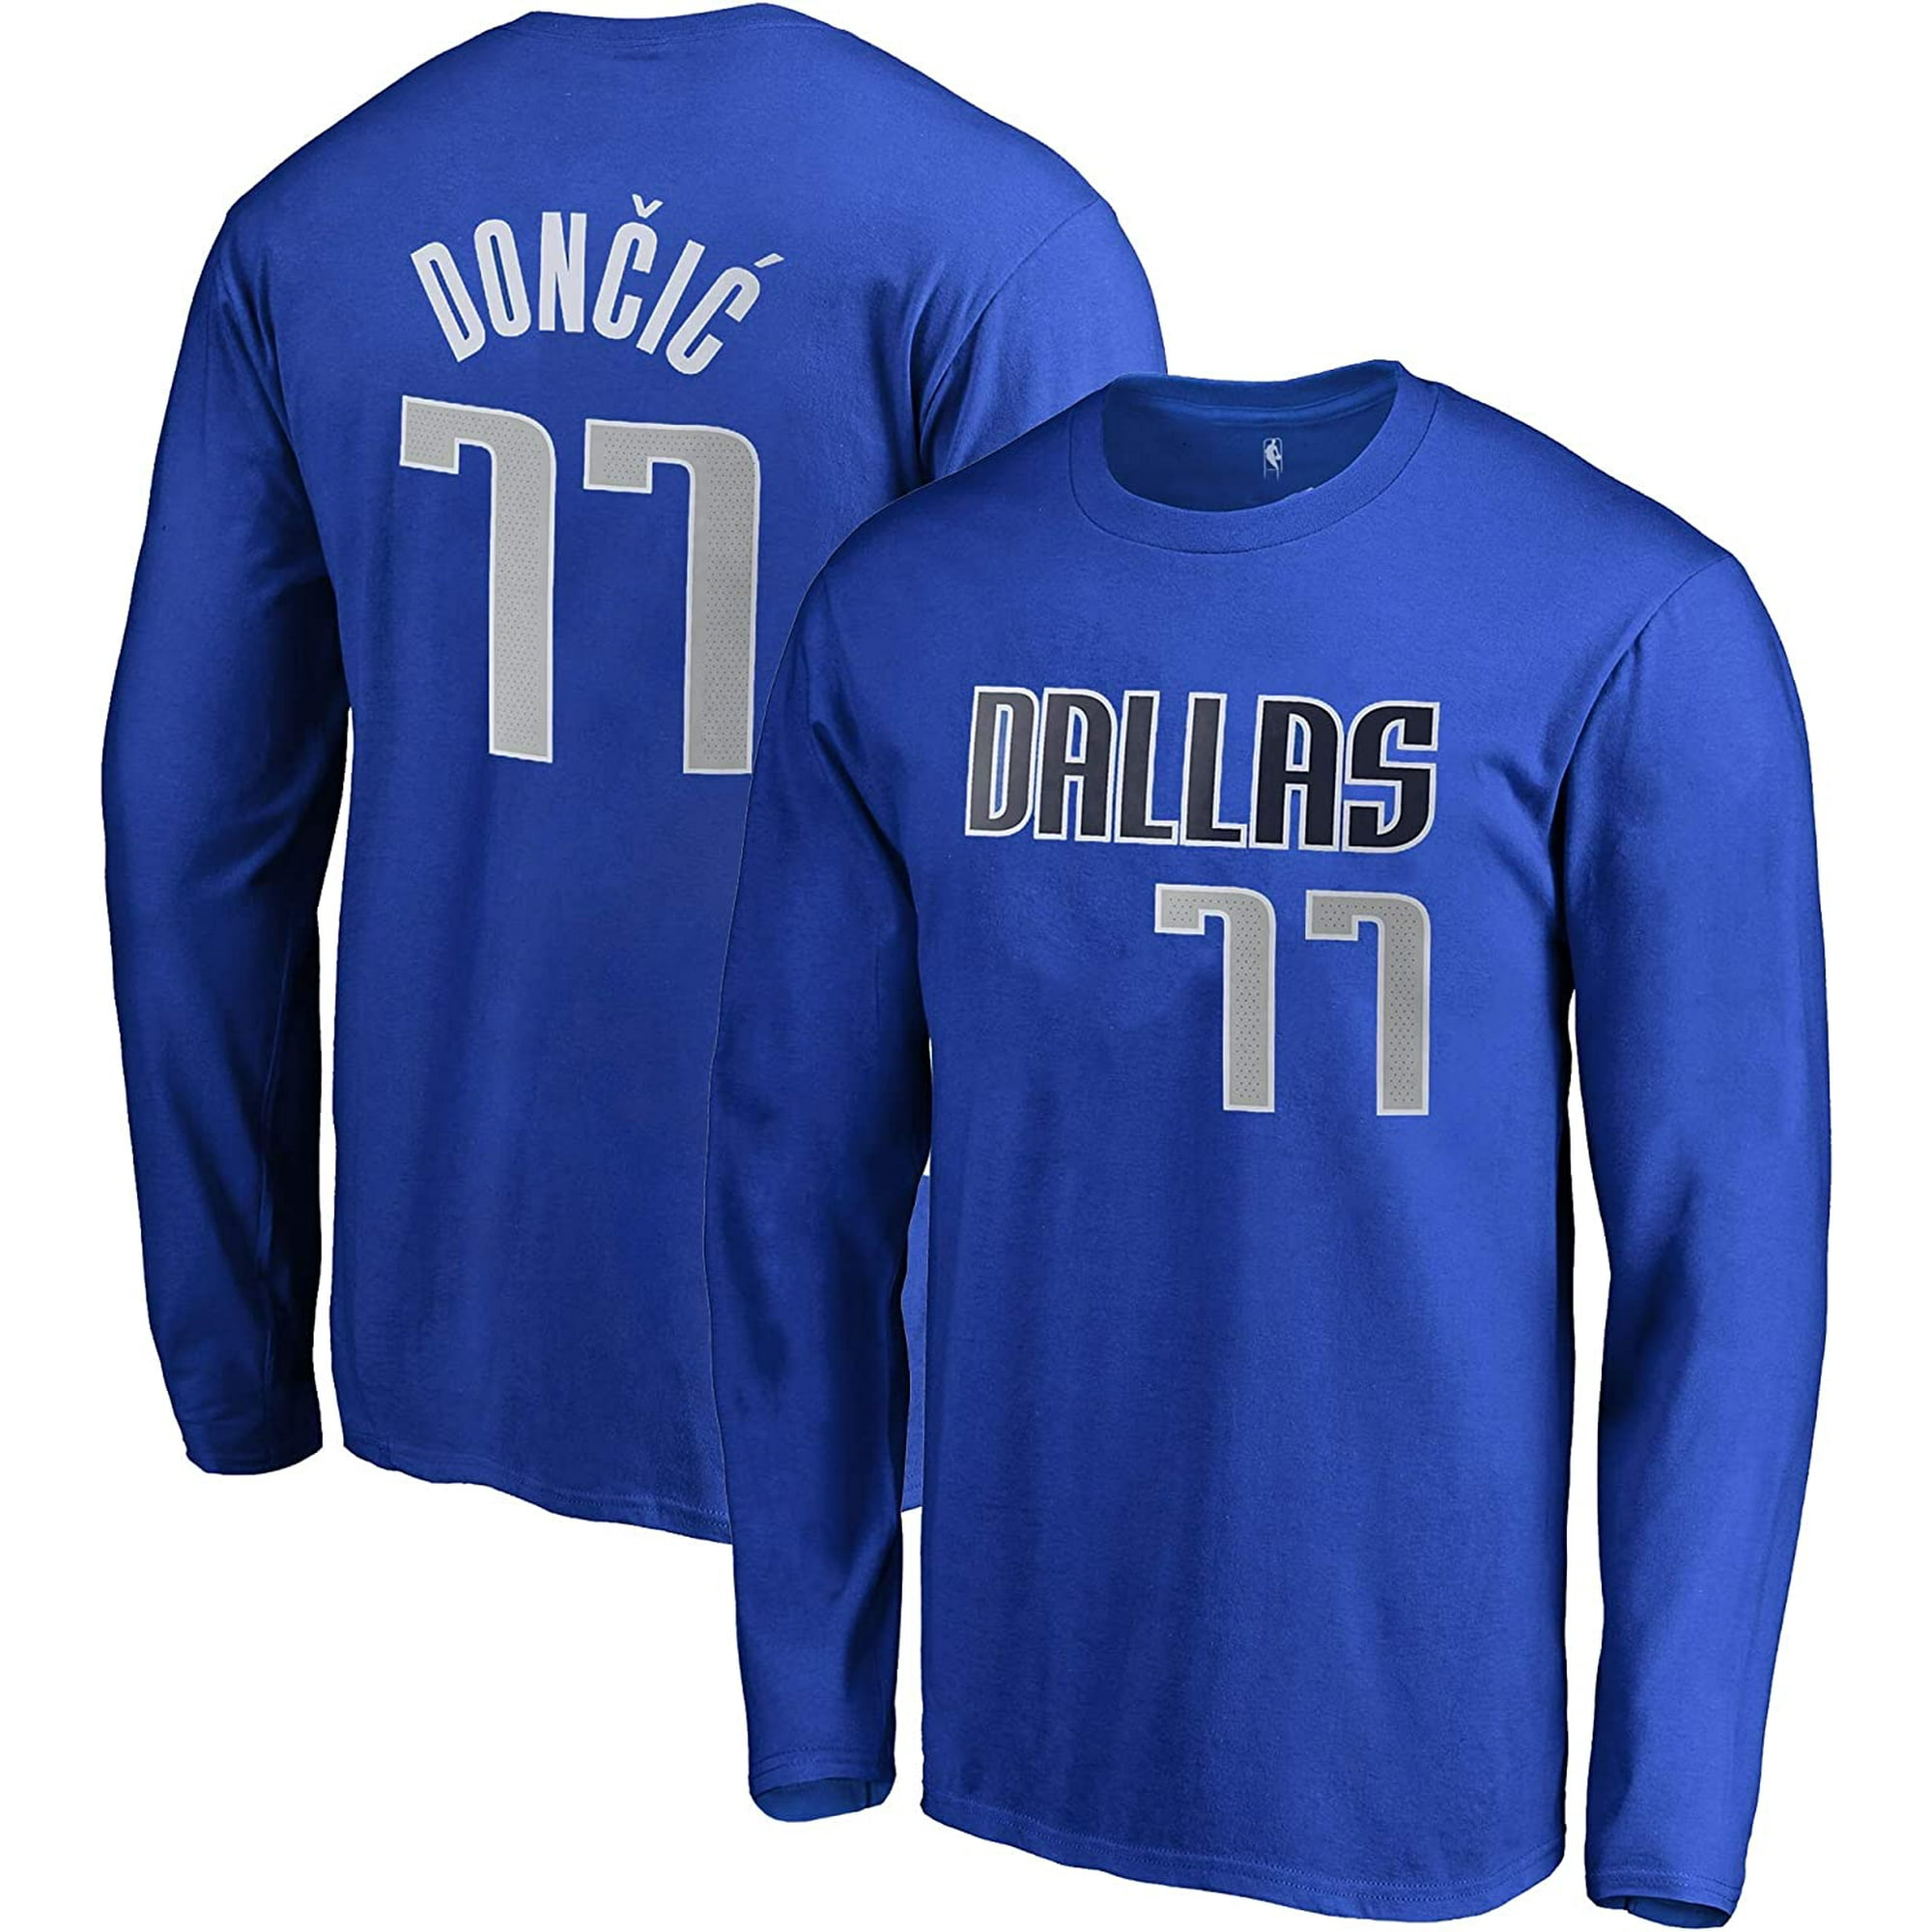 Outerstuff NBA Youth Game Time Team Color Player Name and Number Long  Sleeve Jersey T-Shirt